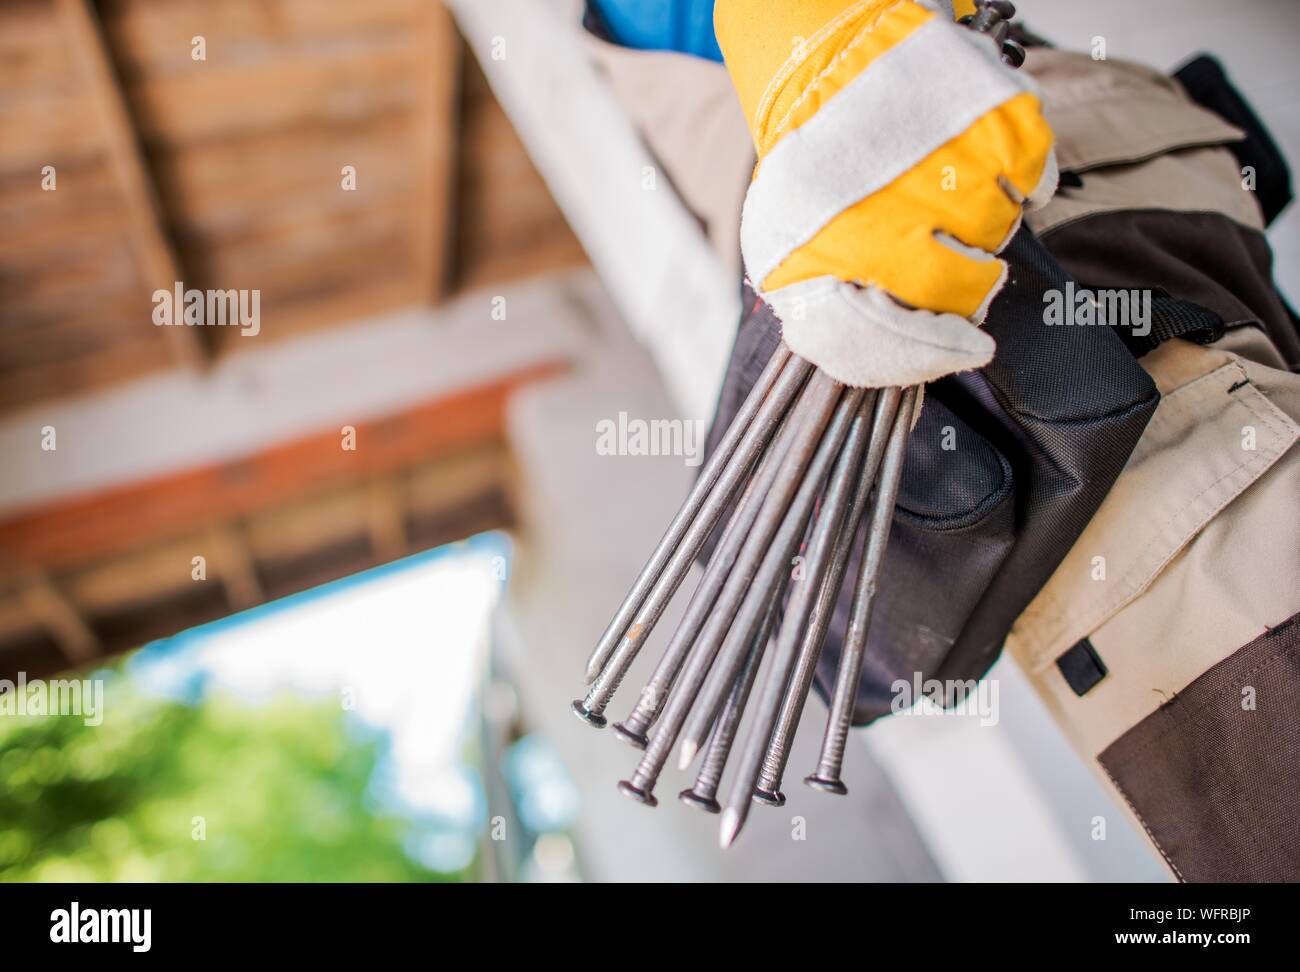 Midsection Of Person Holding Nails Stock Photo